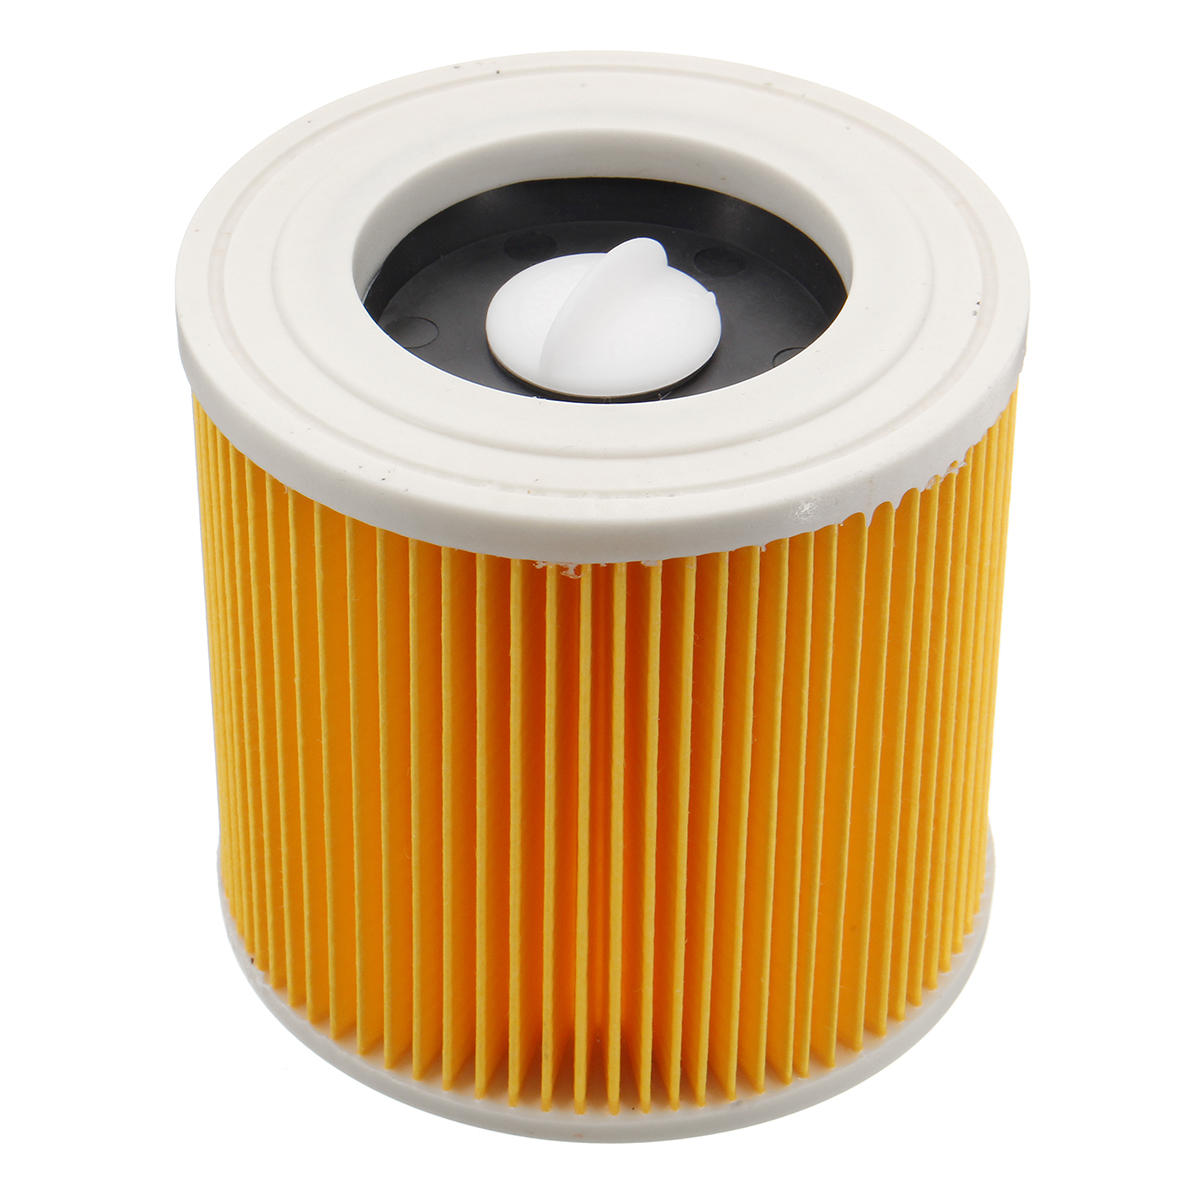 

Wet & Dry Vacuum Cleaner Cartridge Filter Replacement for Karcher MV2 WD2.200 WD3.500 A2504 A2654